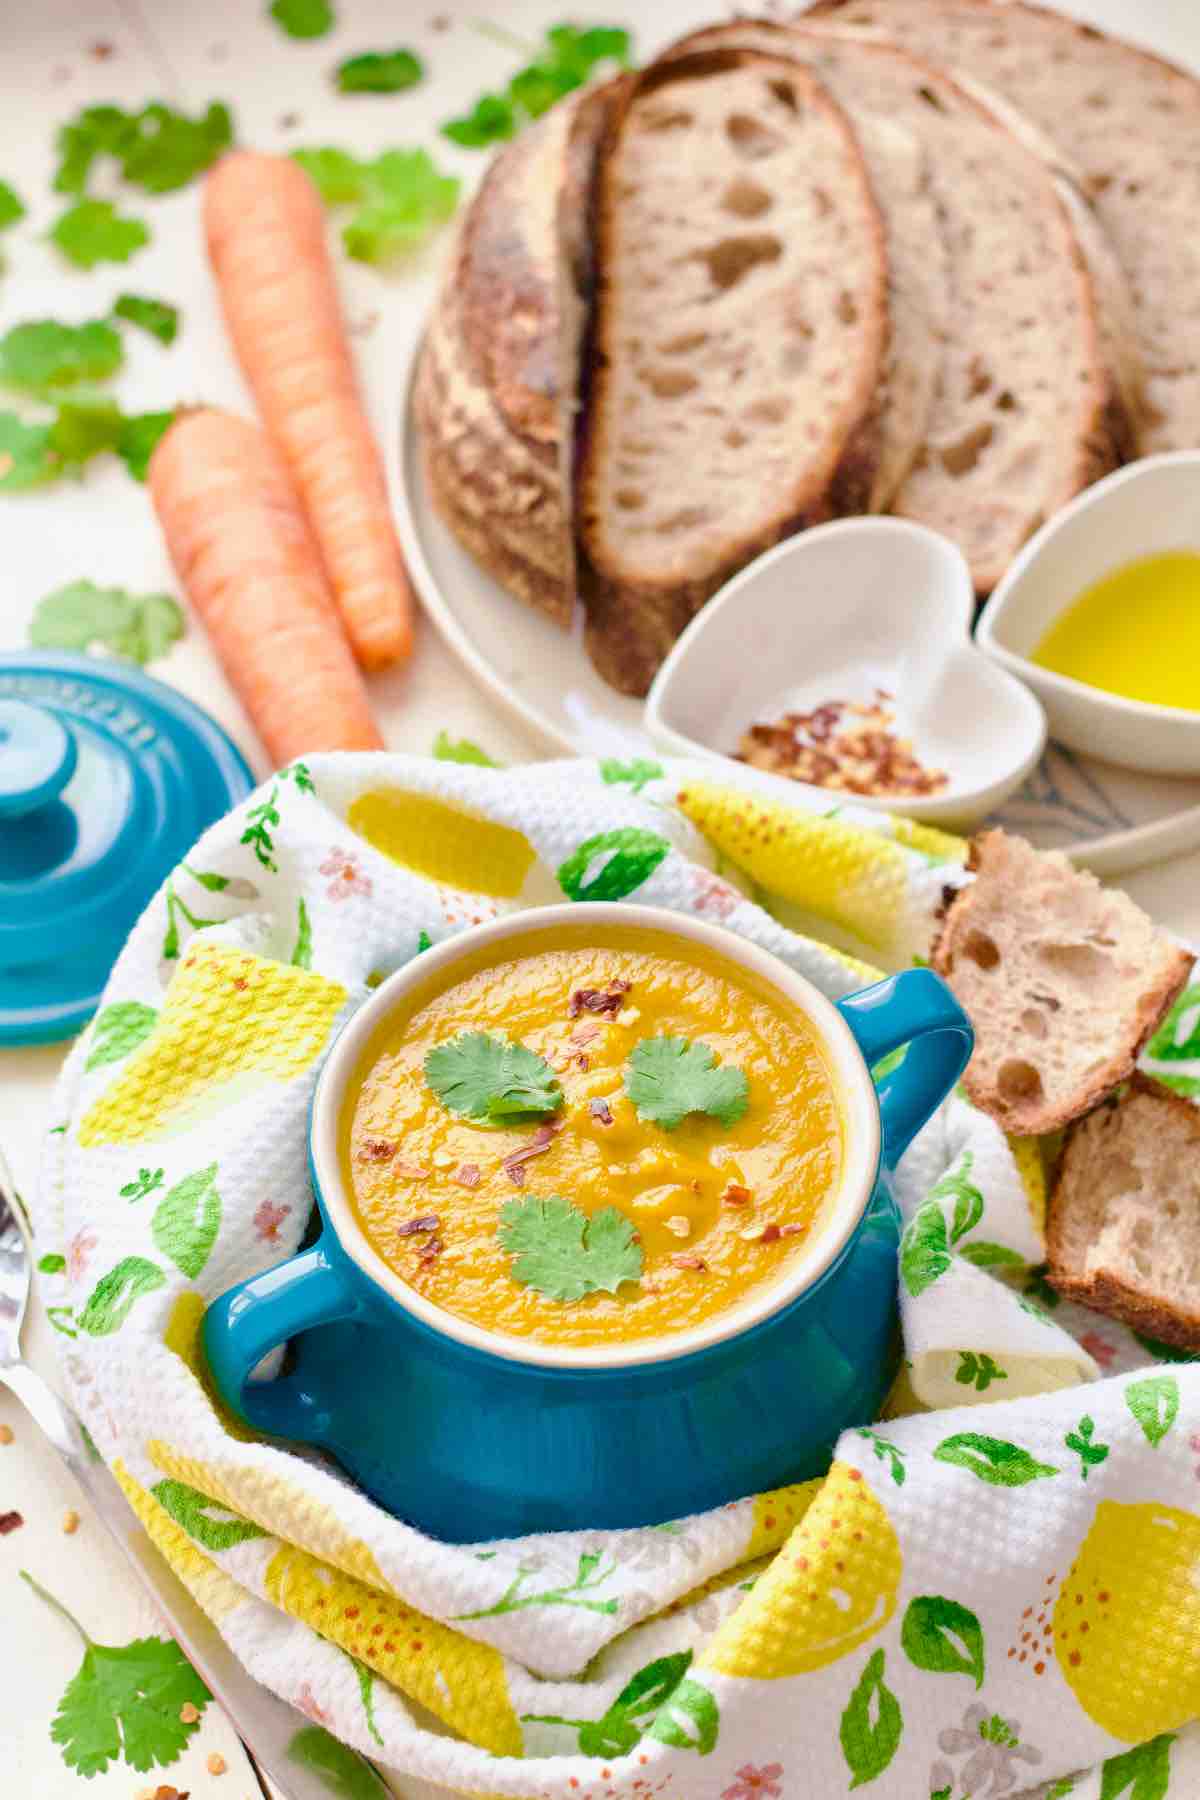 Carrot and coriander soup in serving bowl with bread, oil and chilli flakes.